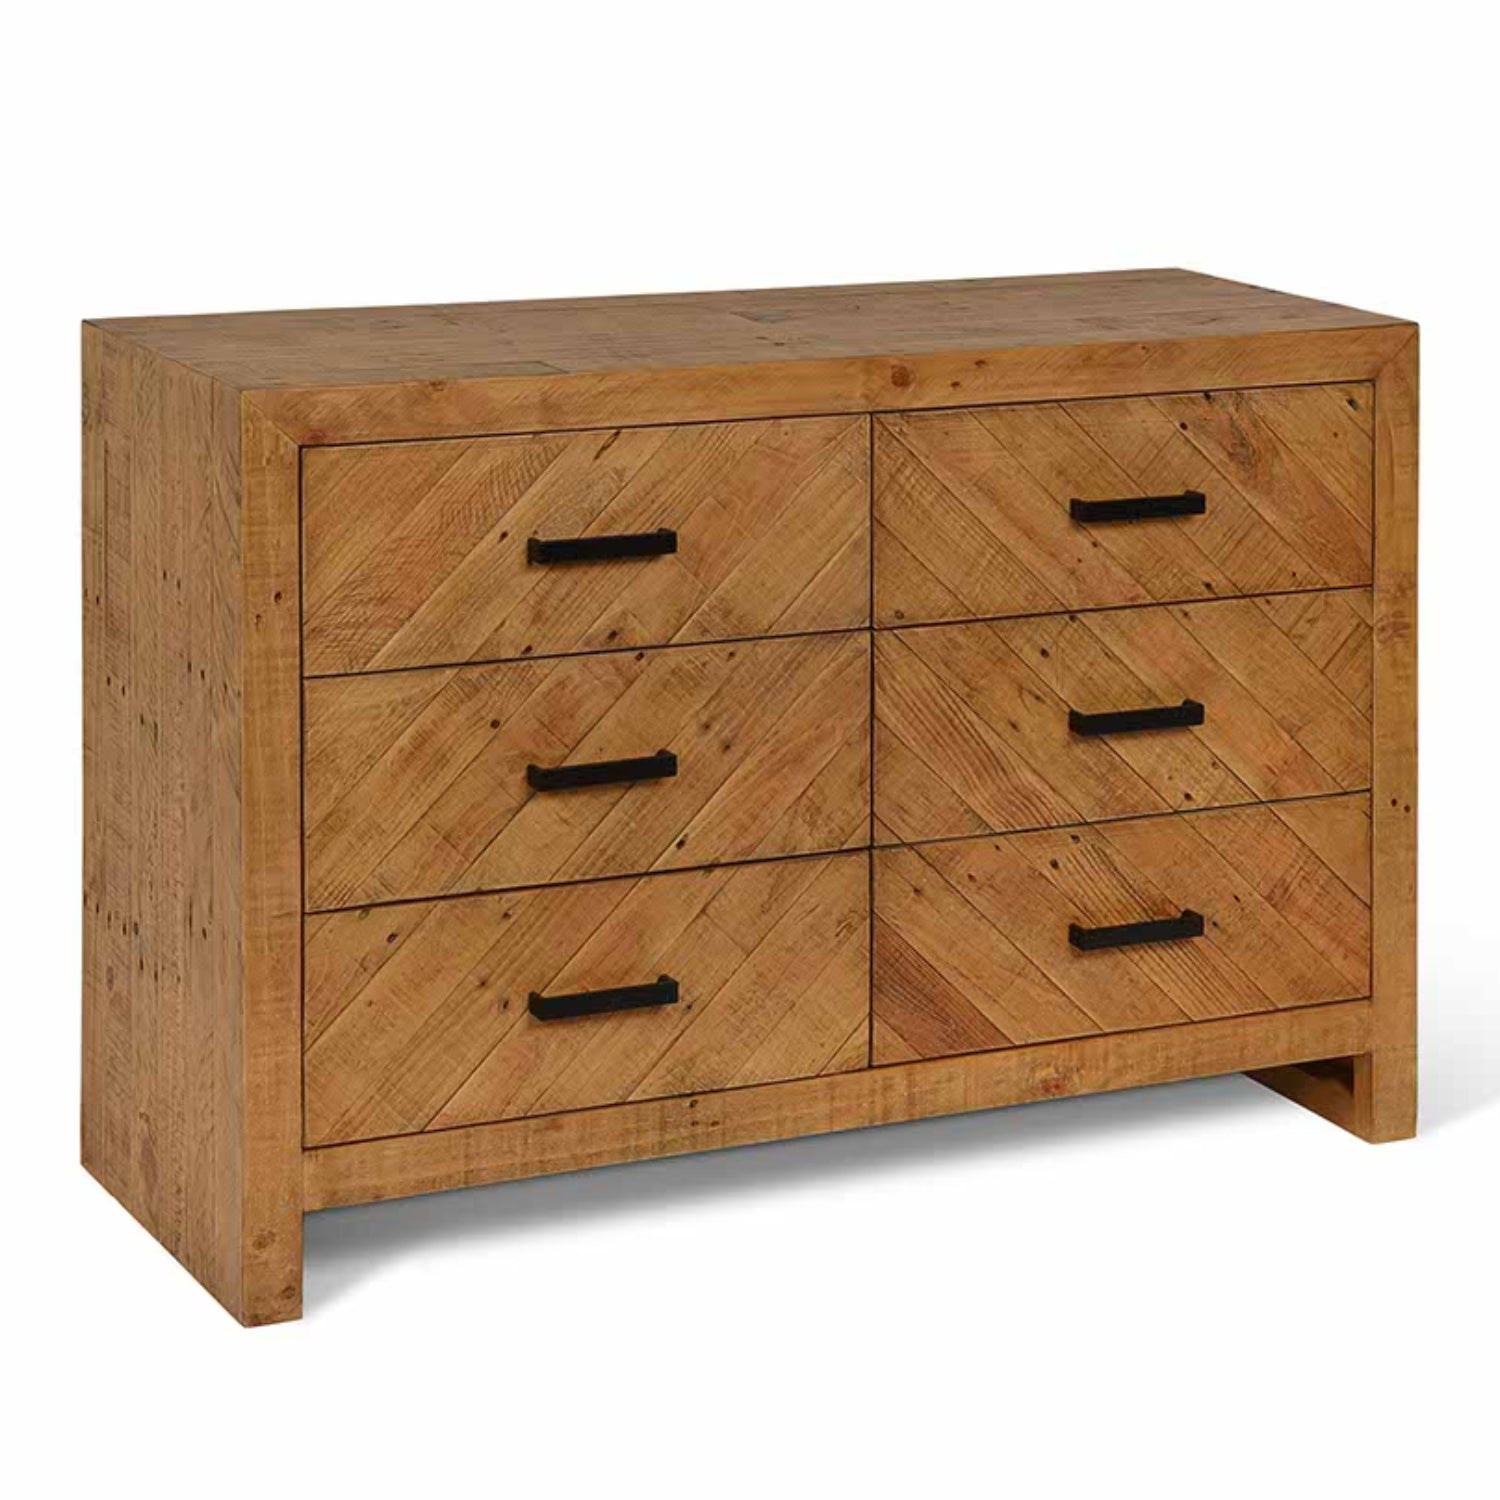 Fawley Eye-Catching Chevron Chest of Drawers